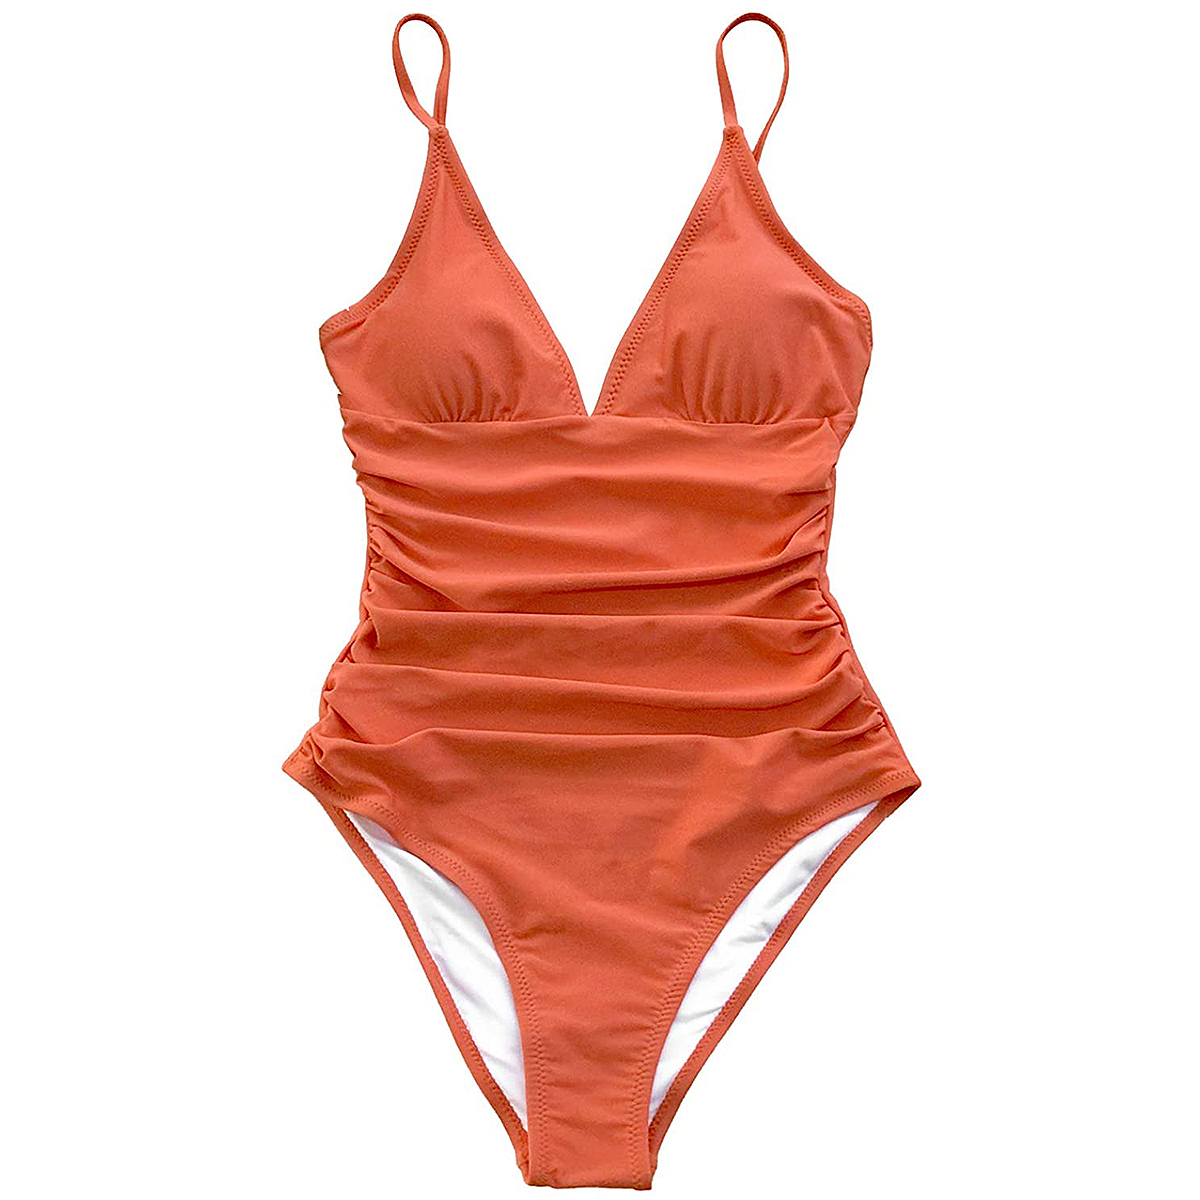 CUPSHE Tummy-Control Swimsuit Is a Flattering Amazon Favorite | Us Weekly